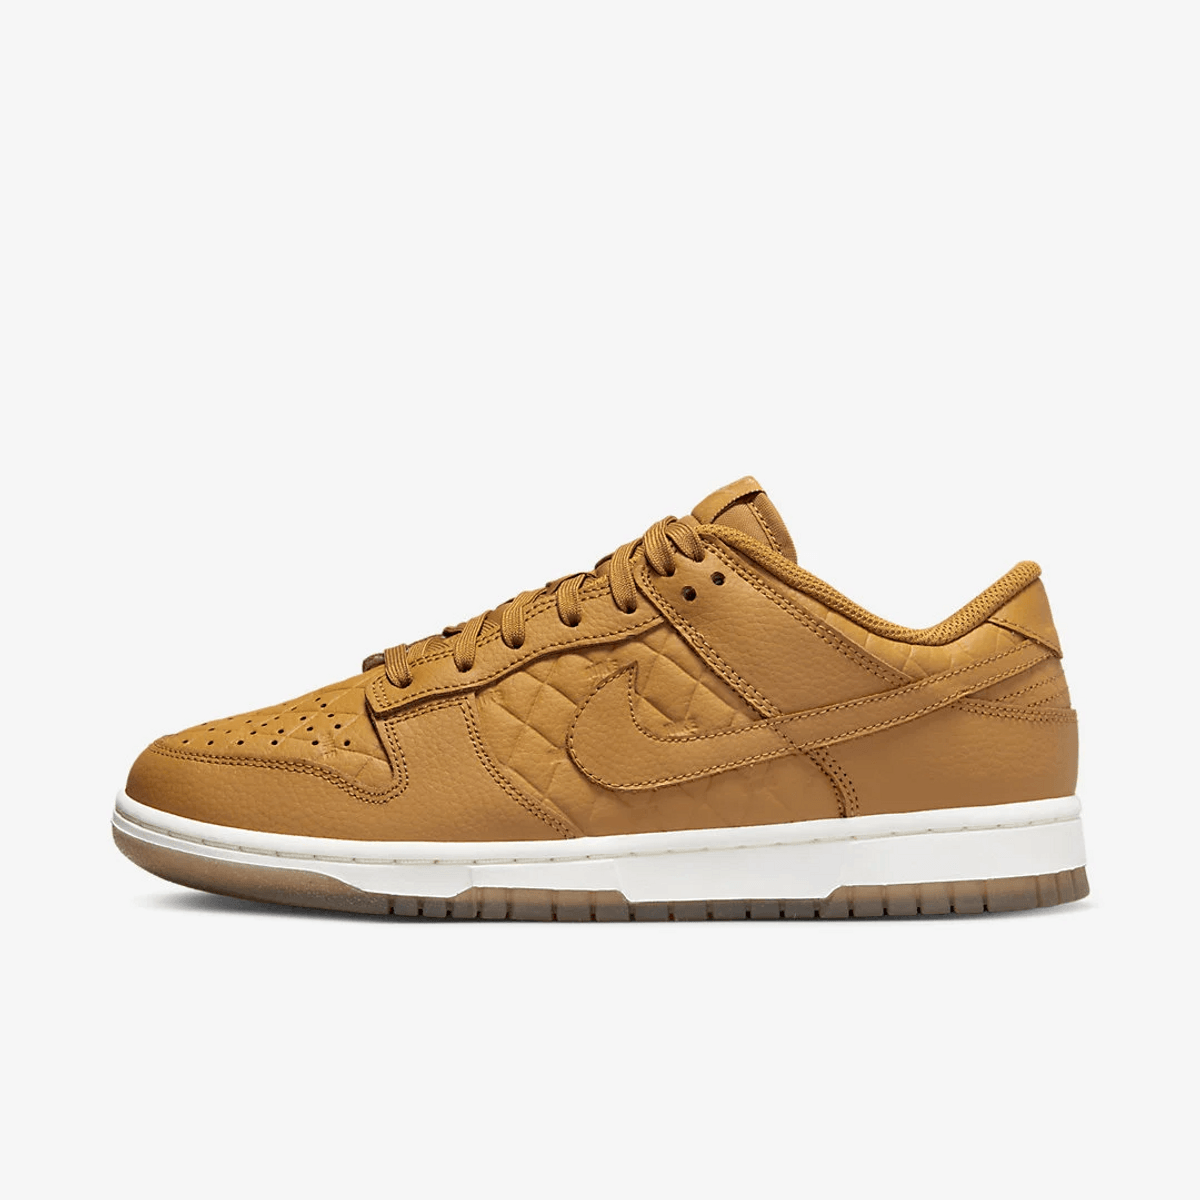 Nike Dunk Low Wheat and Gum Light Brown (W)